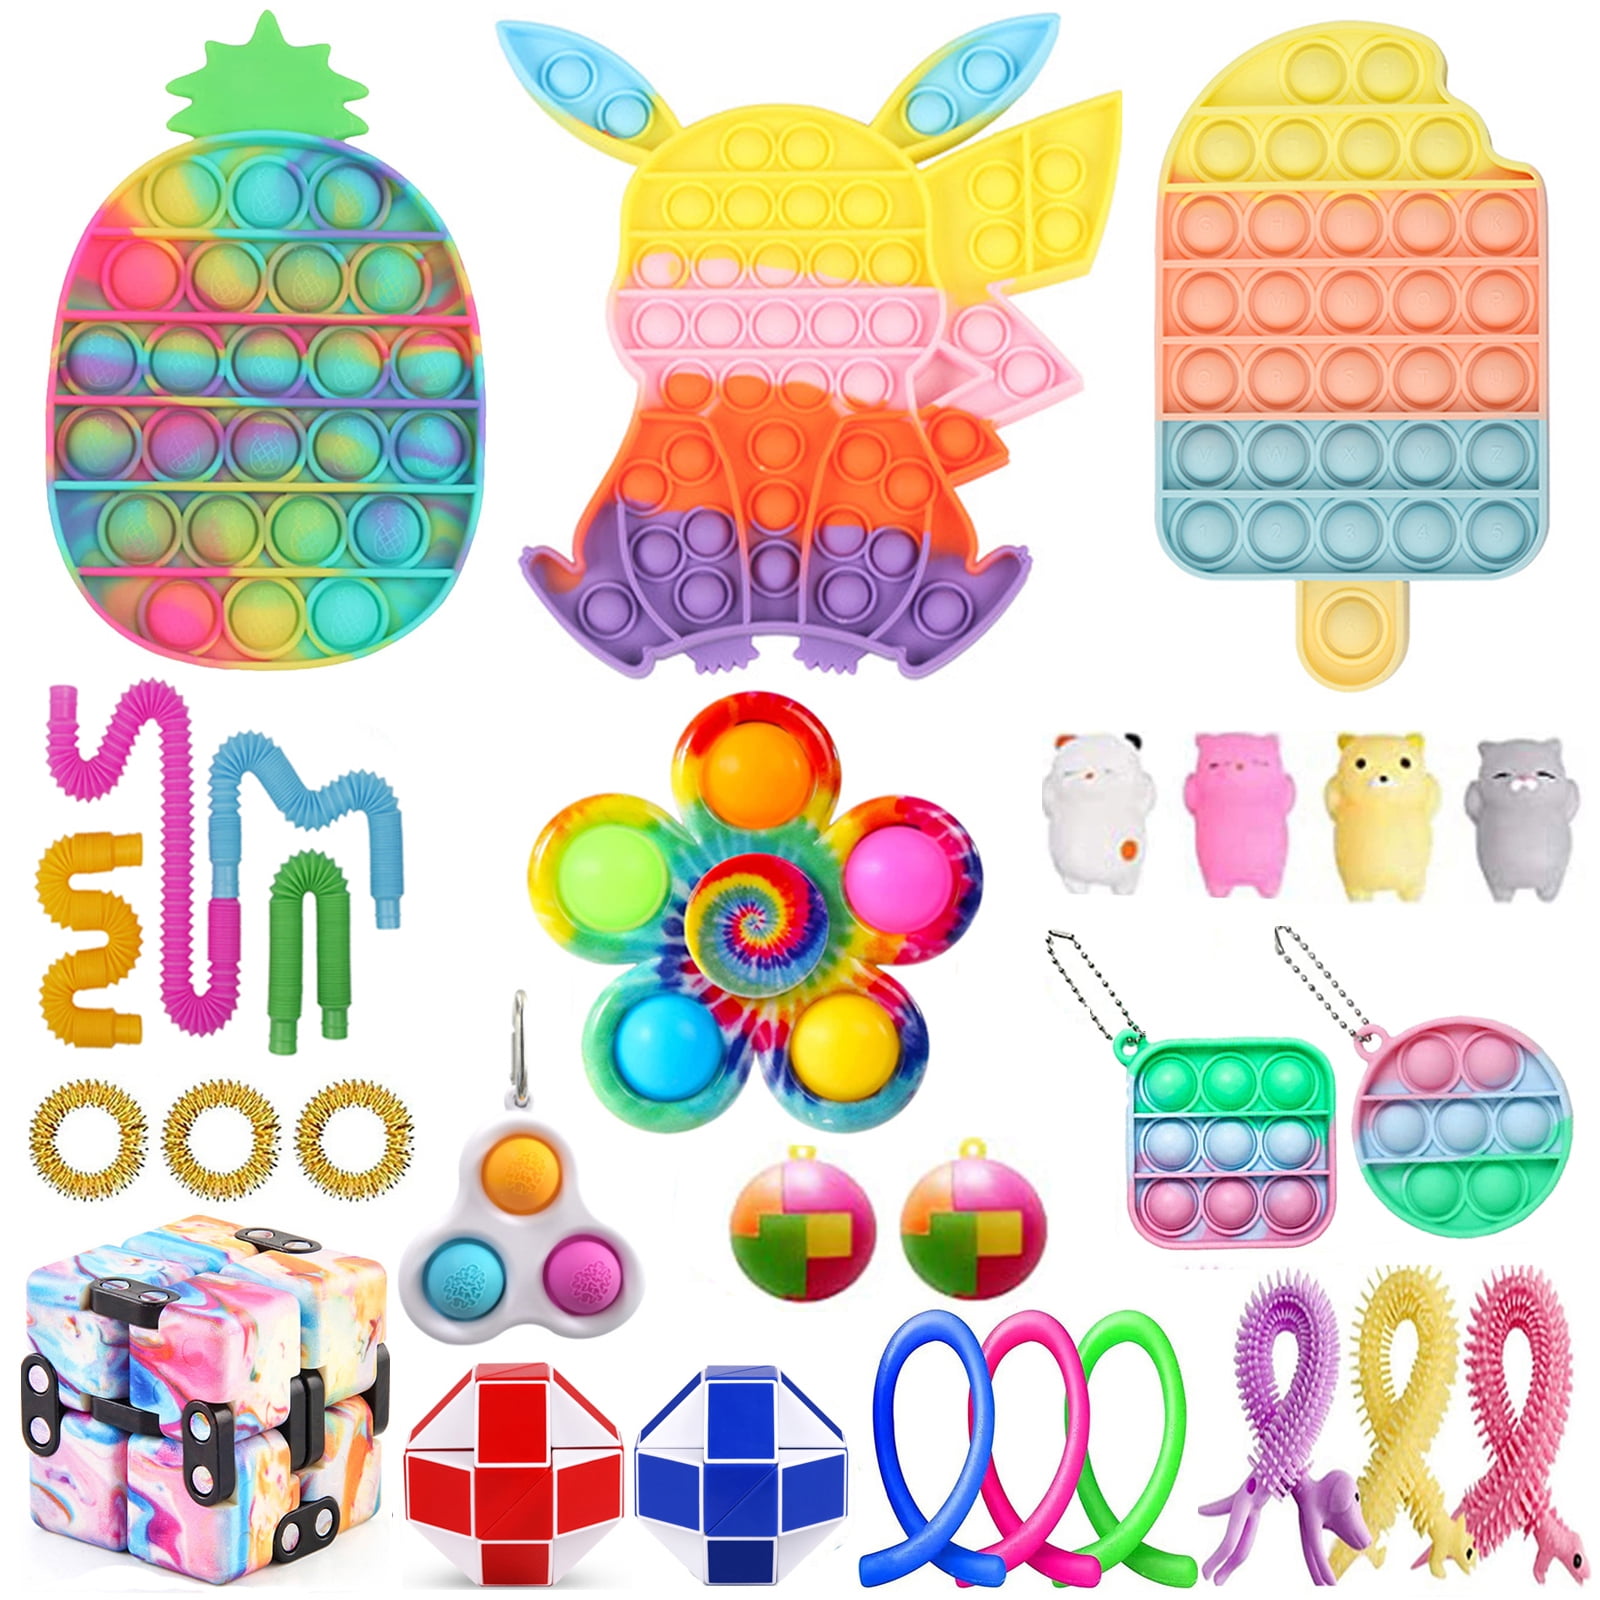 Details about   Fidget Sensory Toys Set 29 Pack For Stress Relief Anti-Anxiety Stocking Stuffer 